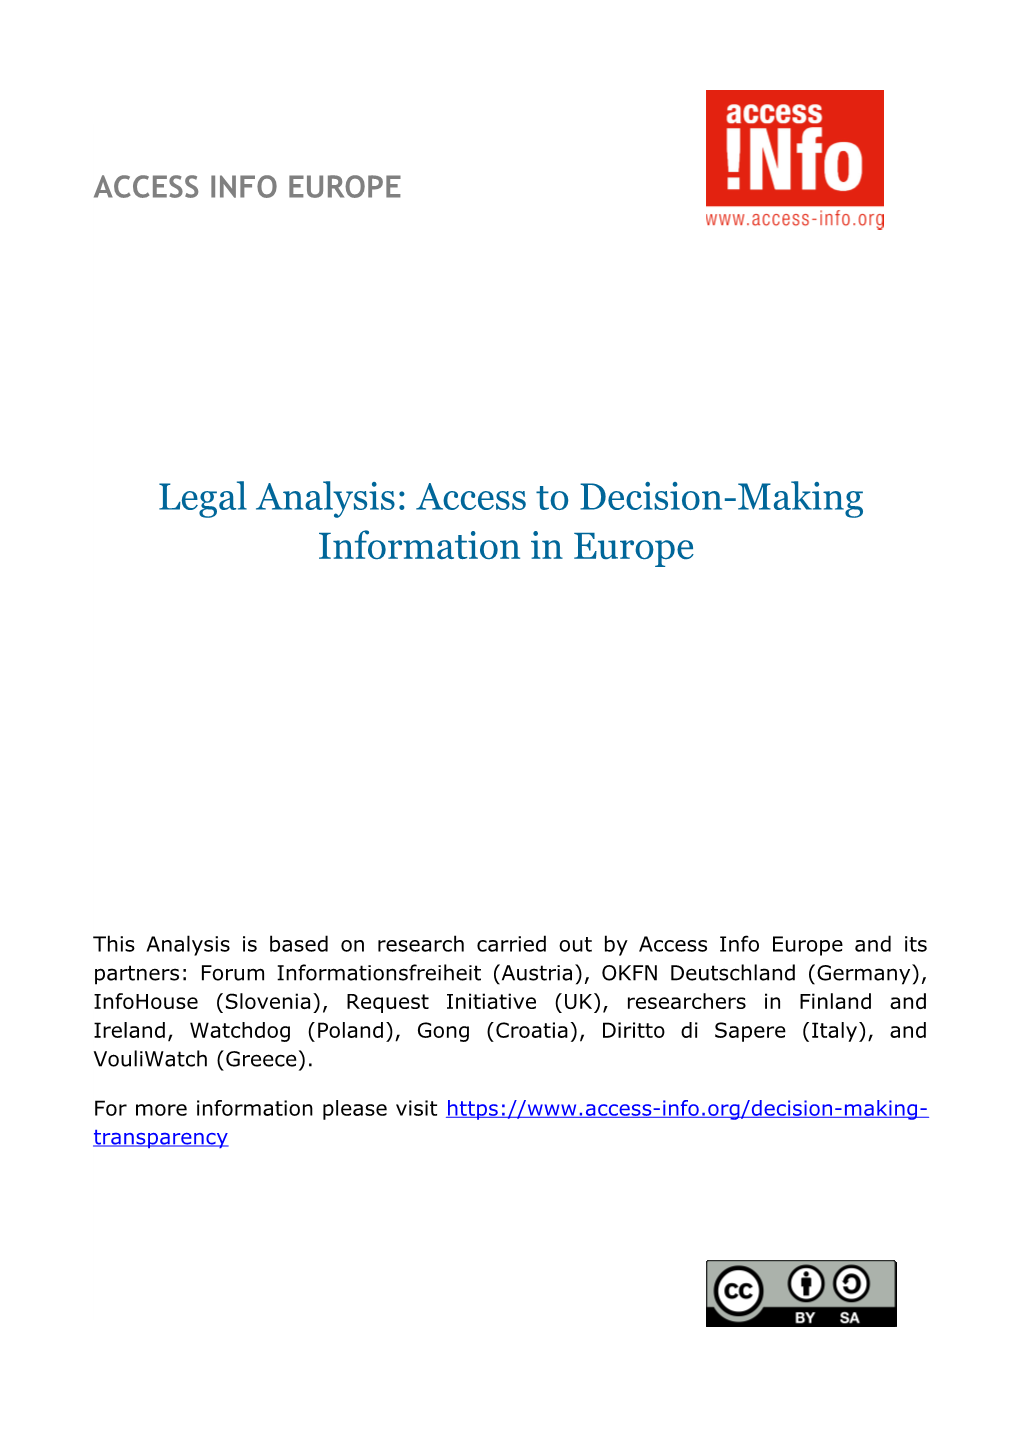 Legal Analysis: Access to Decision-Making Information in Europe